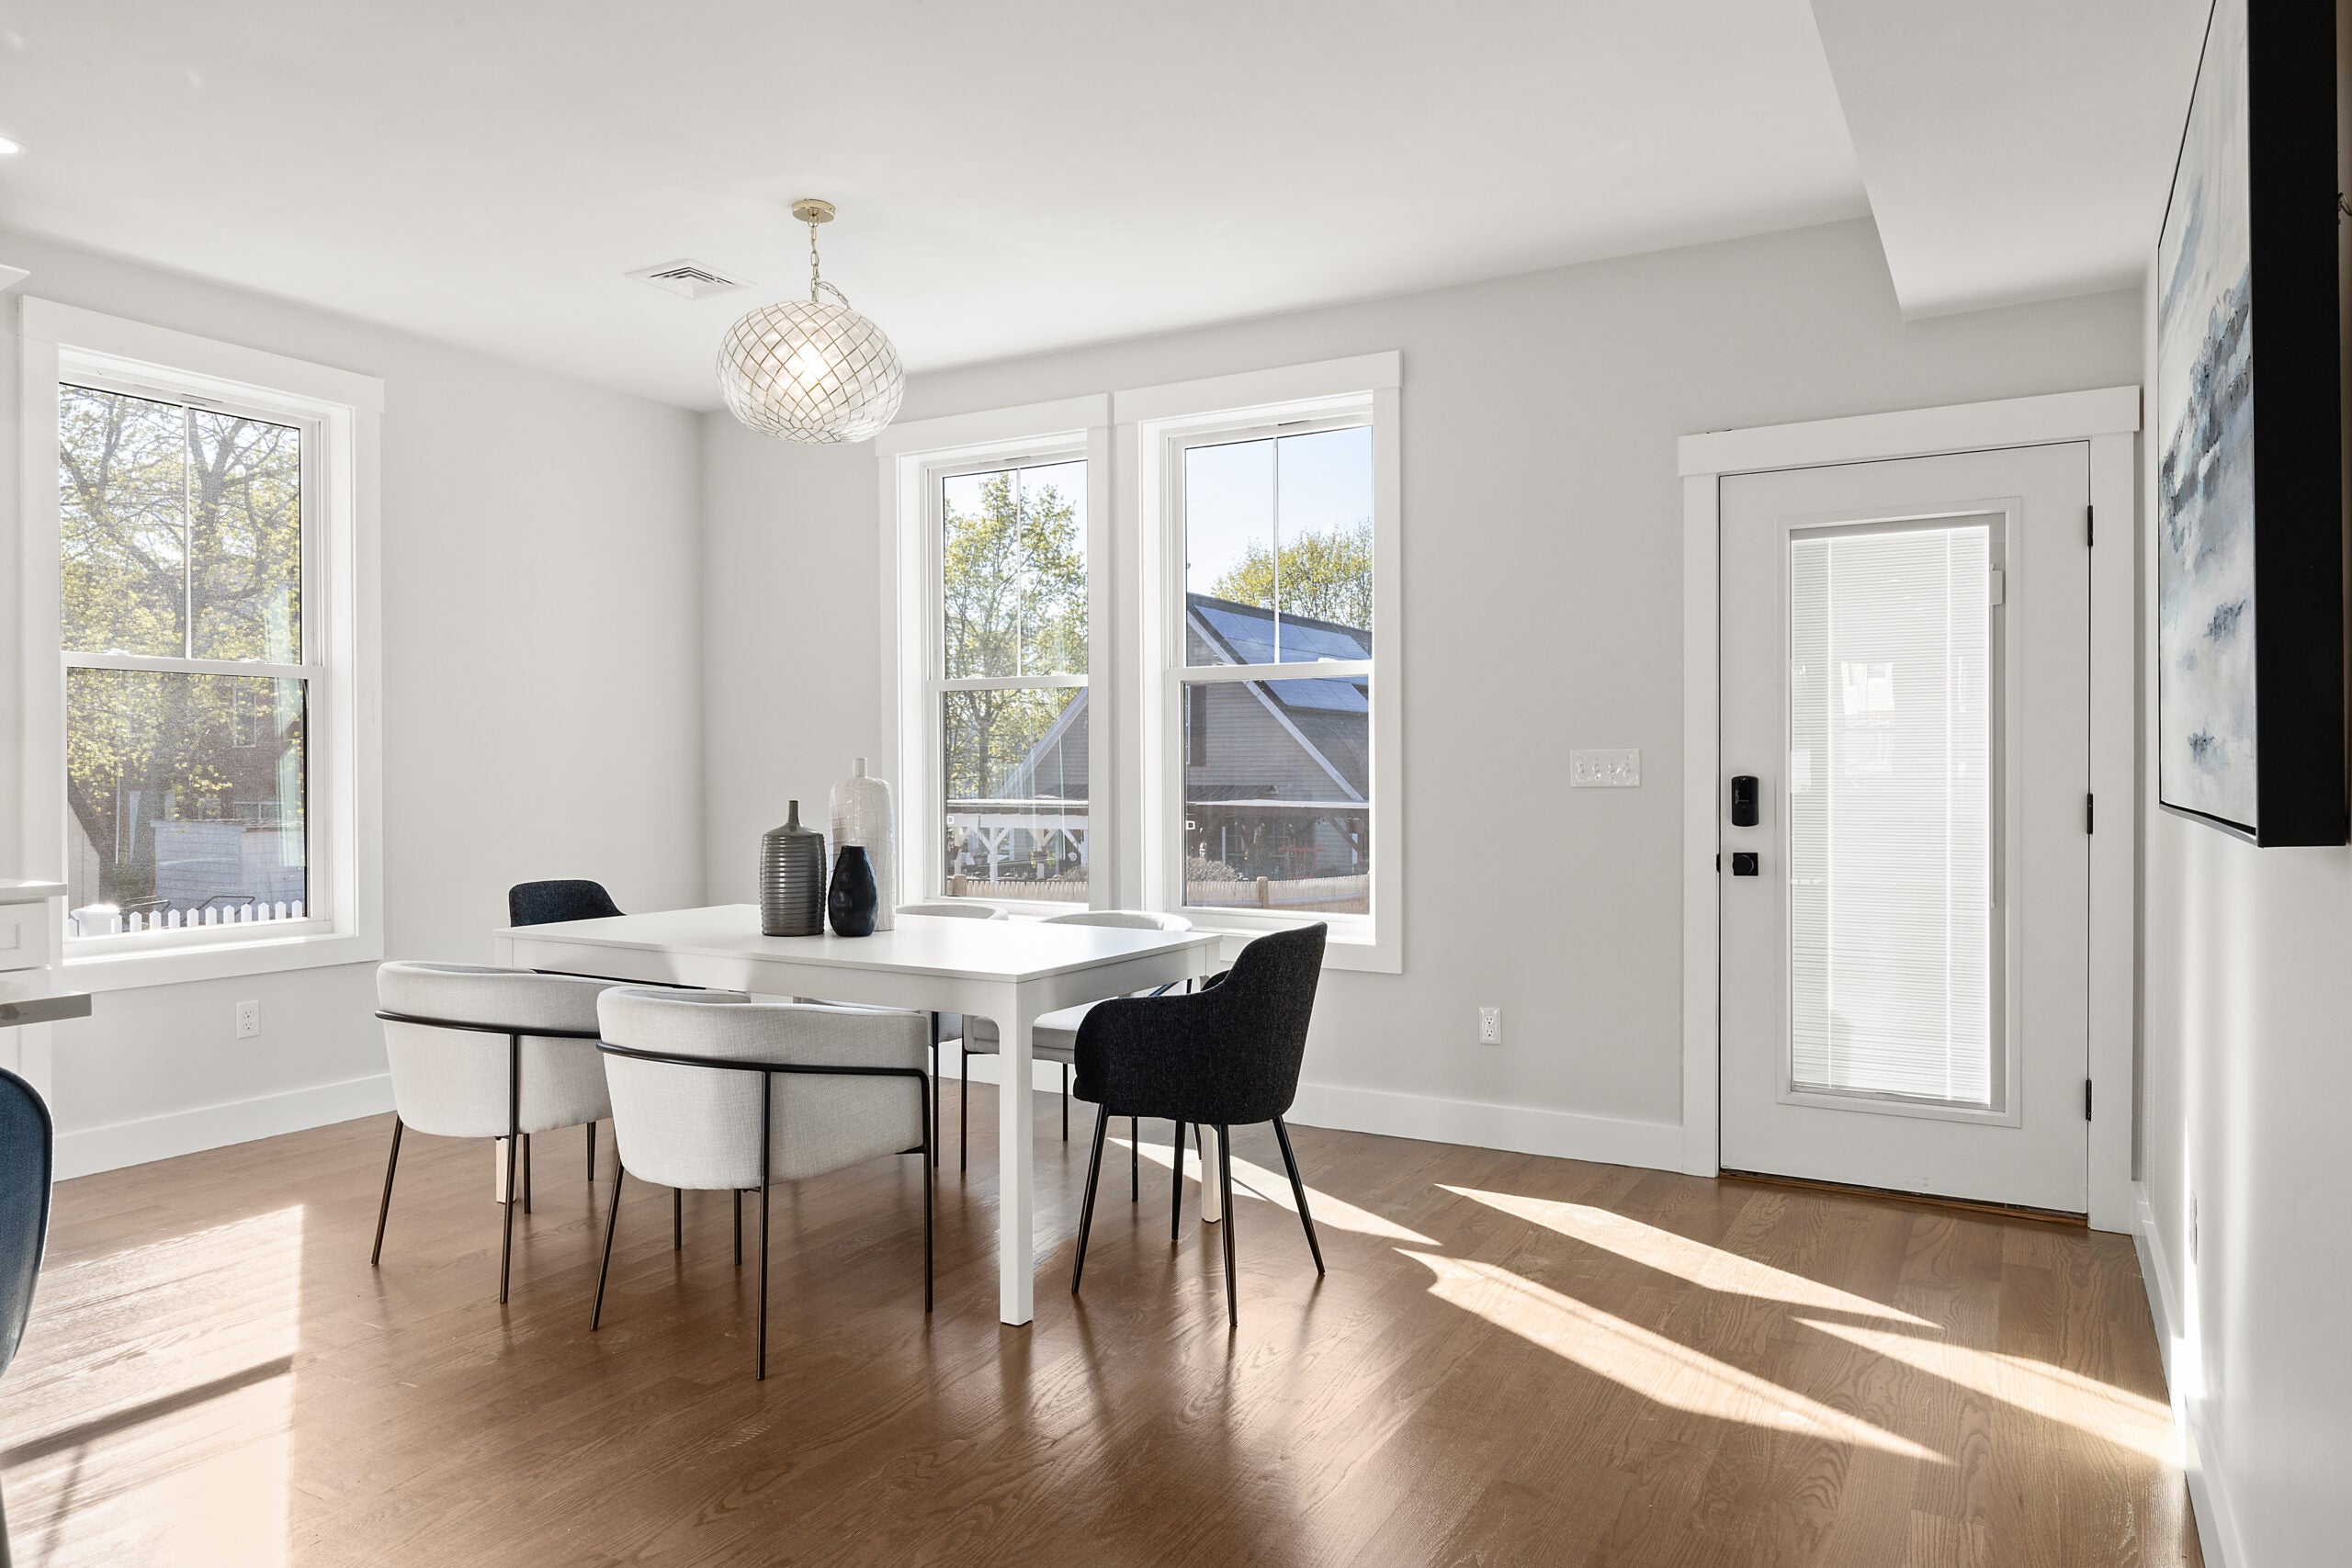 A room with gray walls, three windows (two are paired), a sparkling and bulbous light fixture, a modern table with three Eames-like chairs, and wood flooring. A glass door sits to the back right. Home of the Week in Mattapan.